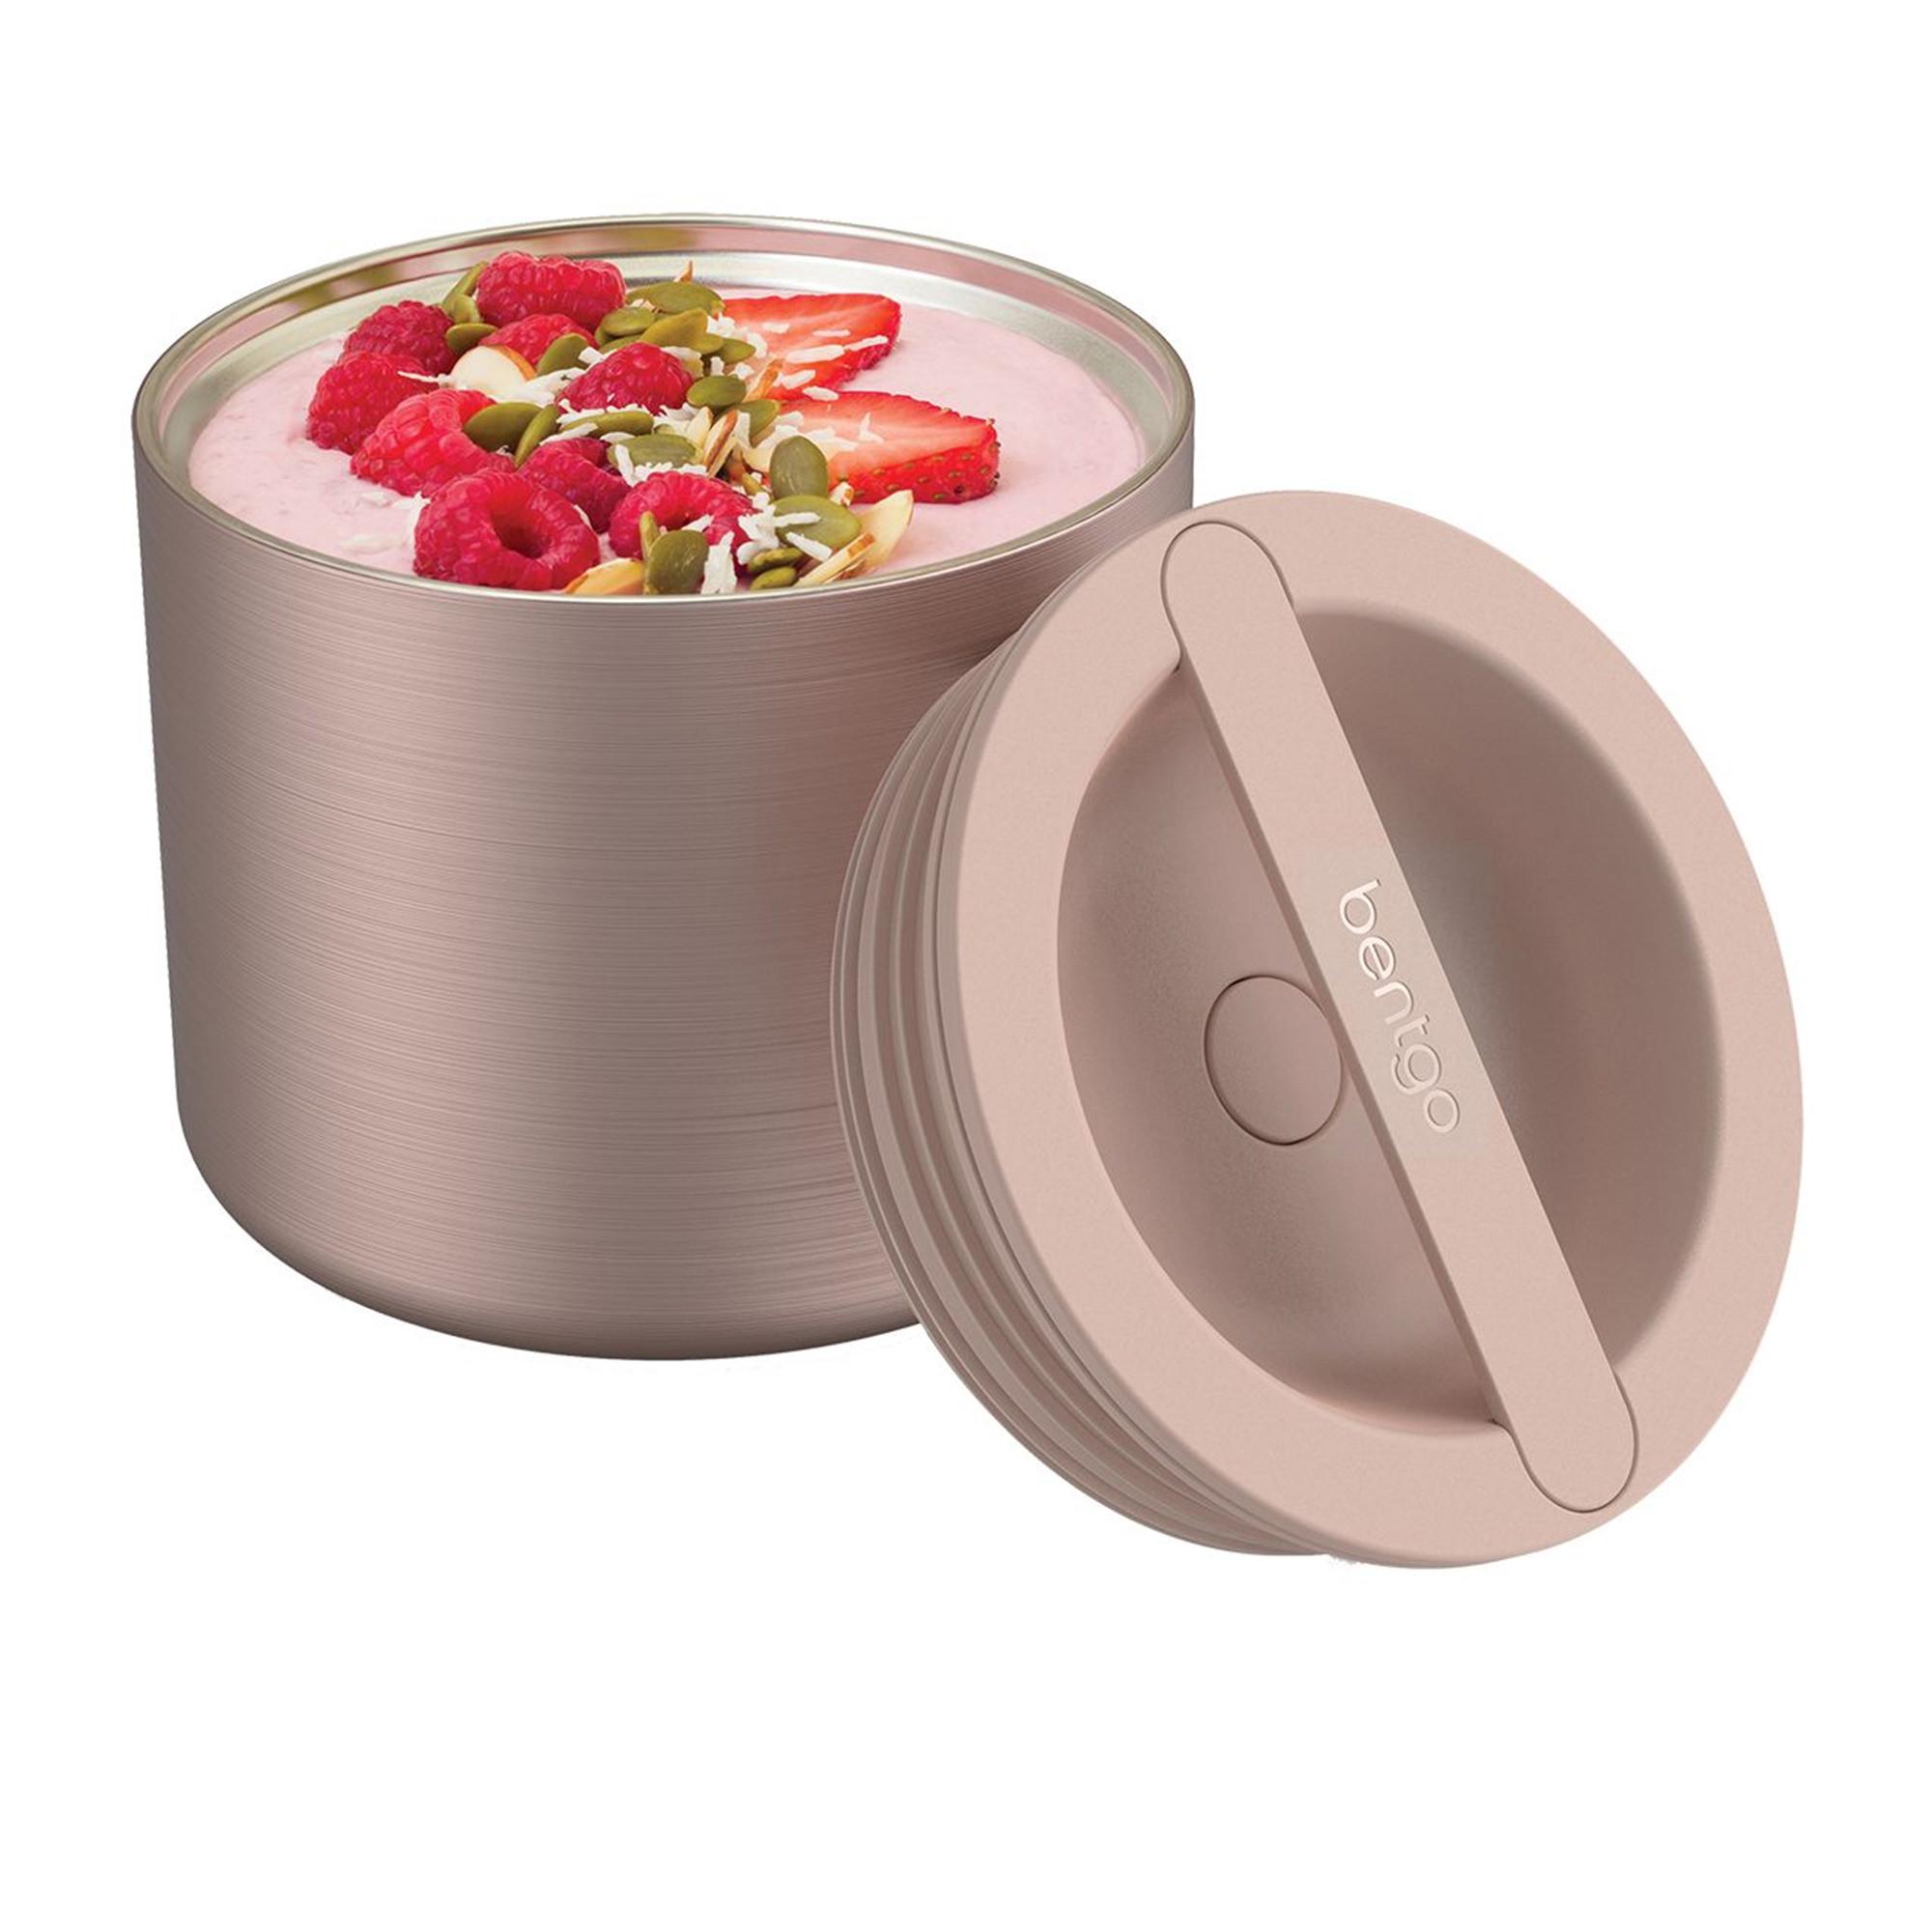 Bentgo Stainless Steel Insulated Food Container 560ml Rose Gold Image 4